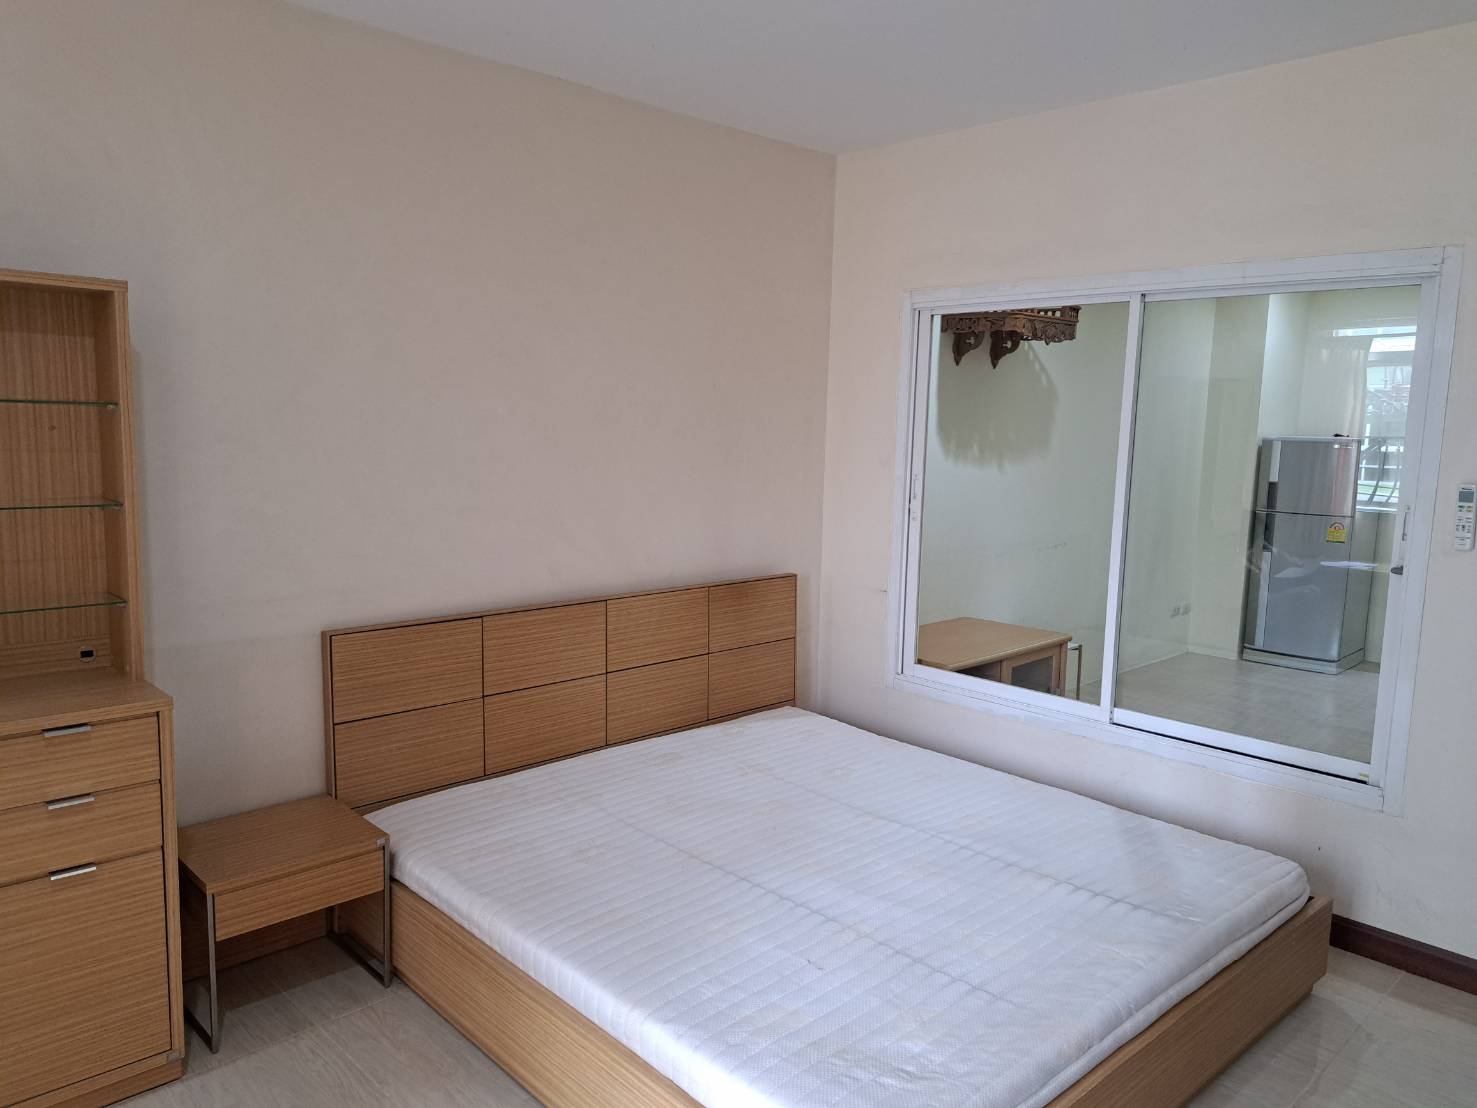 Selling at a loss!! It's good to live and rent!! Very spacious room 46.59 sq m. Condo for sale, Klang Krung Resort Project, Building B1, 3rd floor, condo in Huai Khwang area, Soi Ratchada 7.